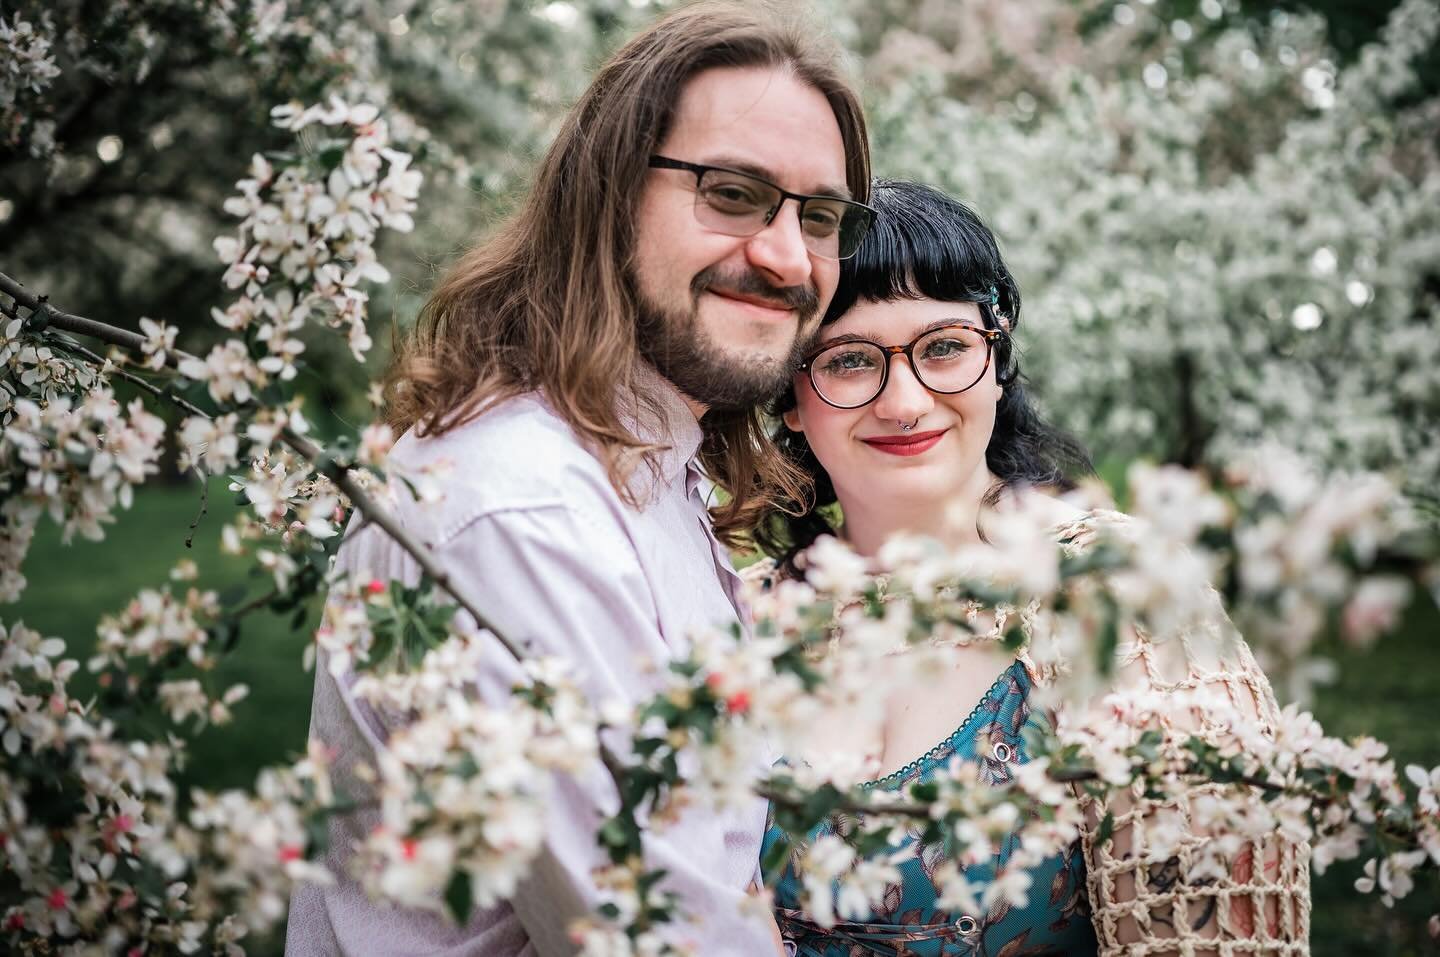 This was a Magical evening at Washington Park with Maeve and Dylan! 🌷 We had the best time Soaking up the sunshine amidst blooming tulips and trees. Can&rsquo;t wait for their wedding at the beautiful Rosemary Spano! 💍✨

 #WashingtonPark #SpringVib